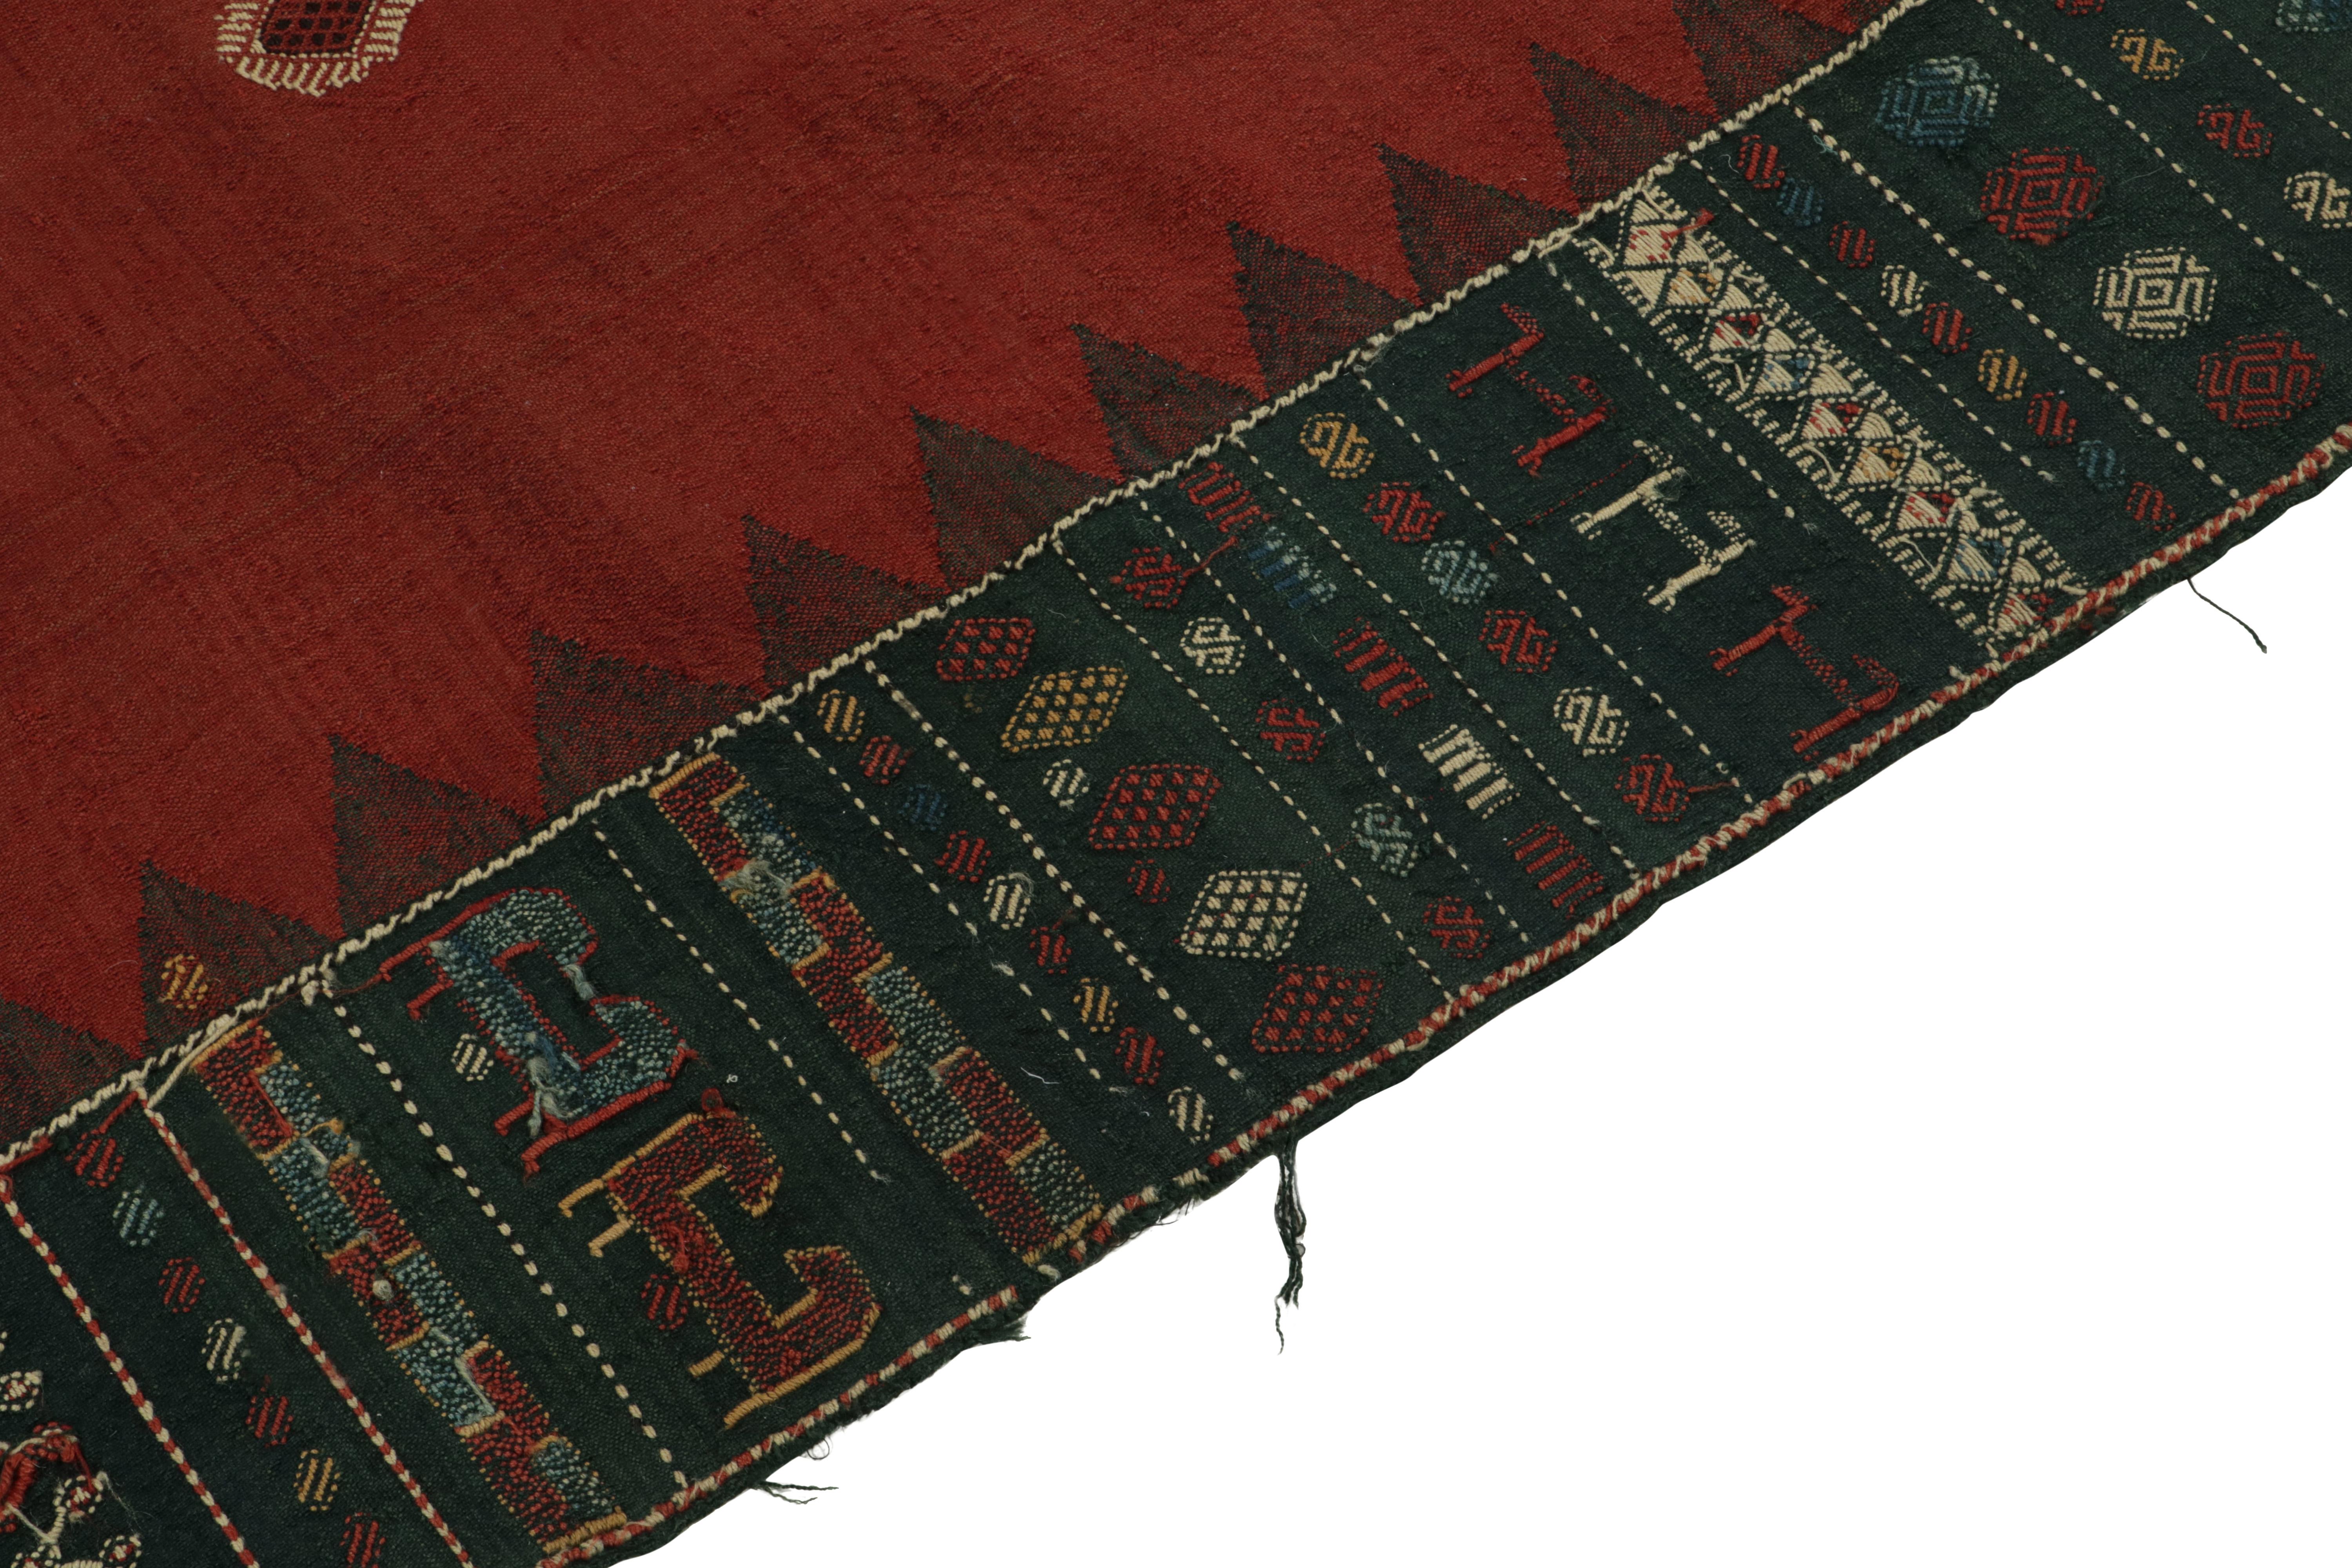 Antique Soumak Kilim Rug in Red, Black Border with Tribal Pattern by Rug & Kilim In Good Condition For Sale In Long Island City, NY